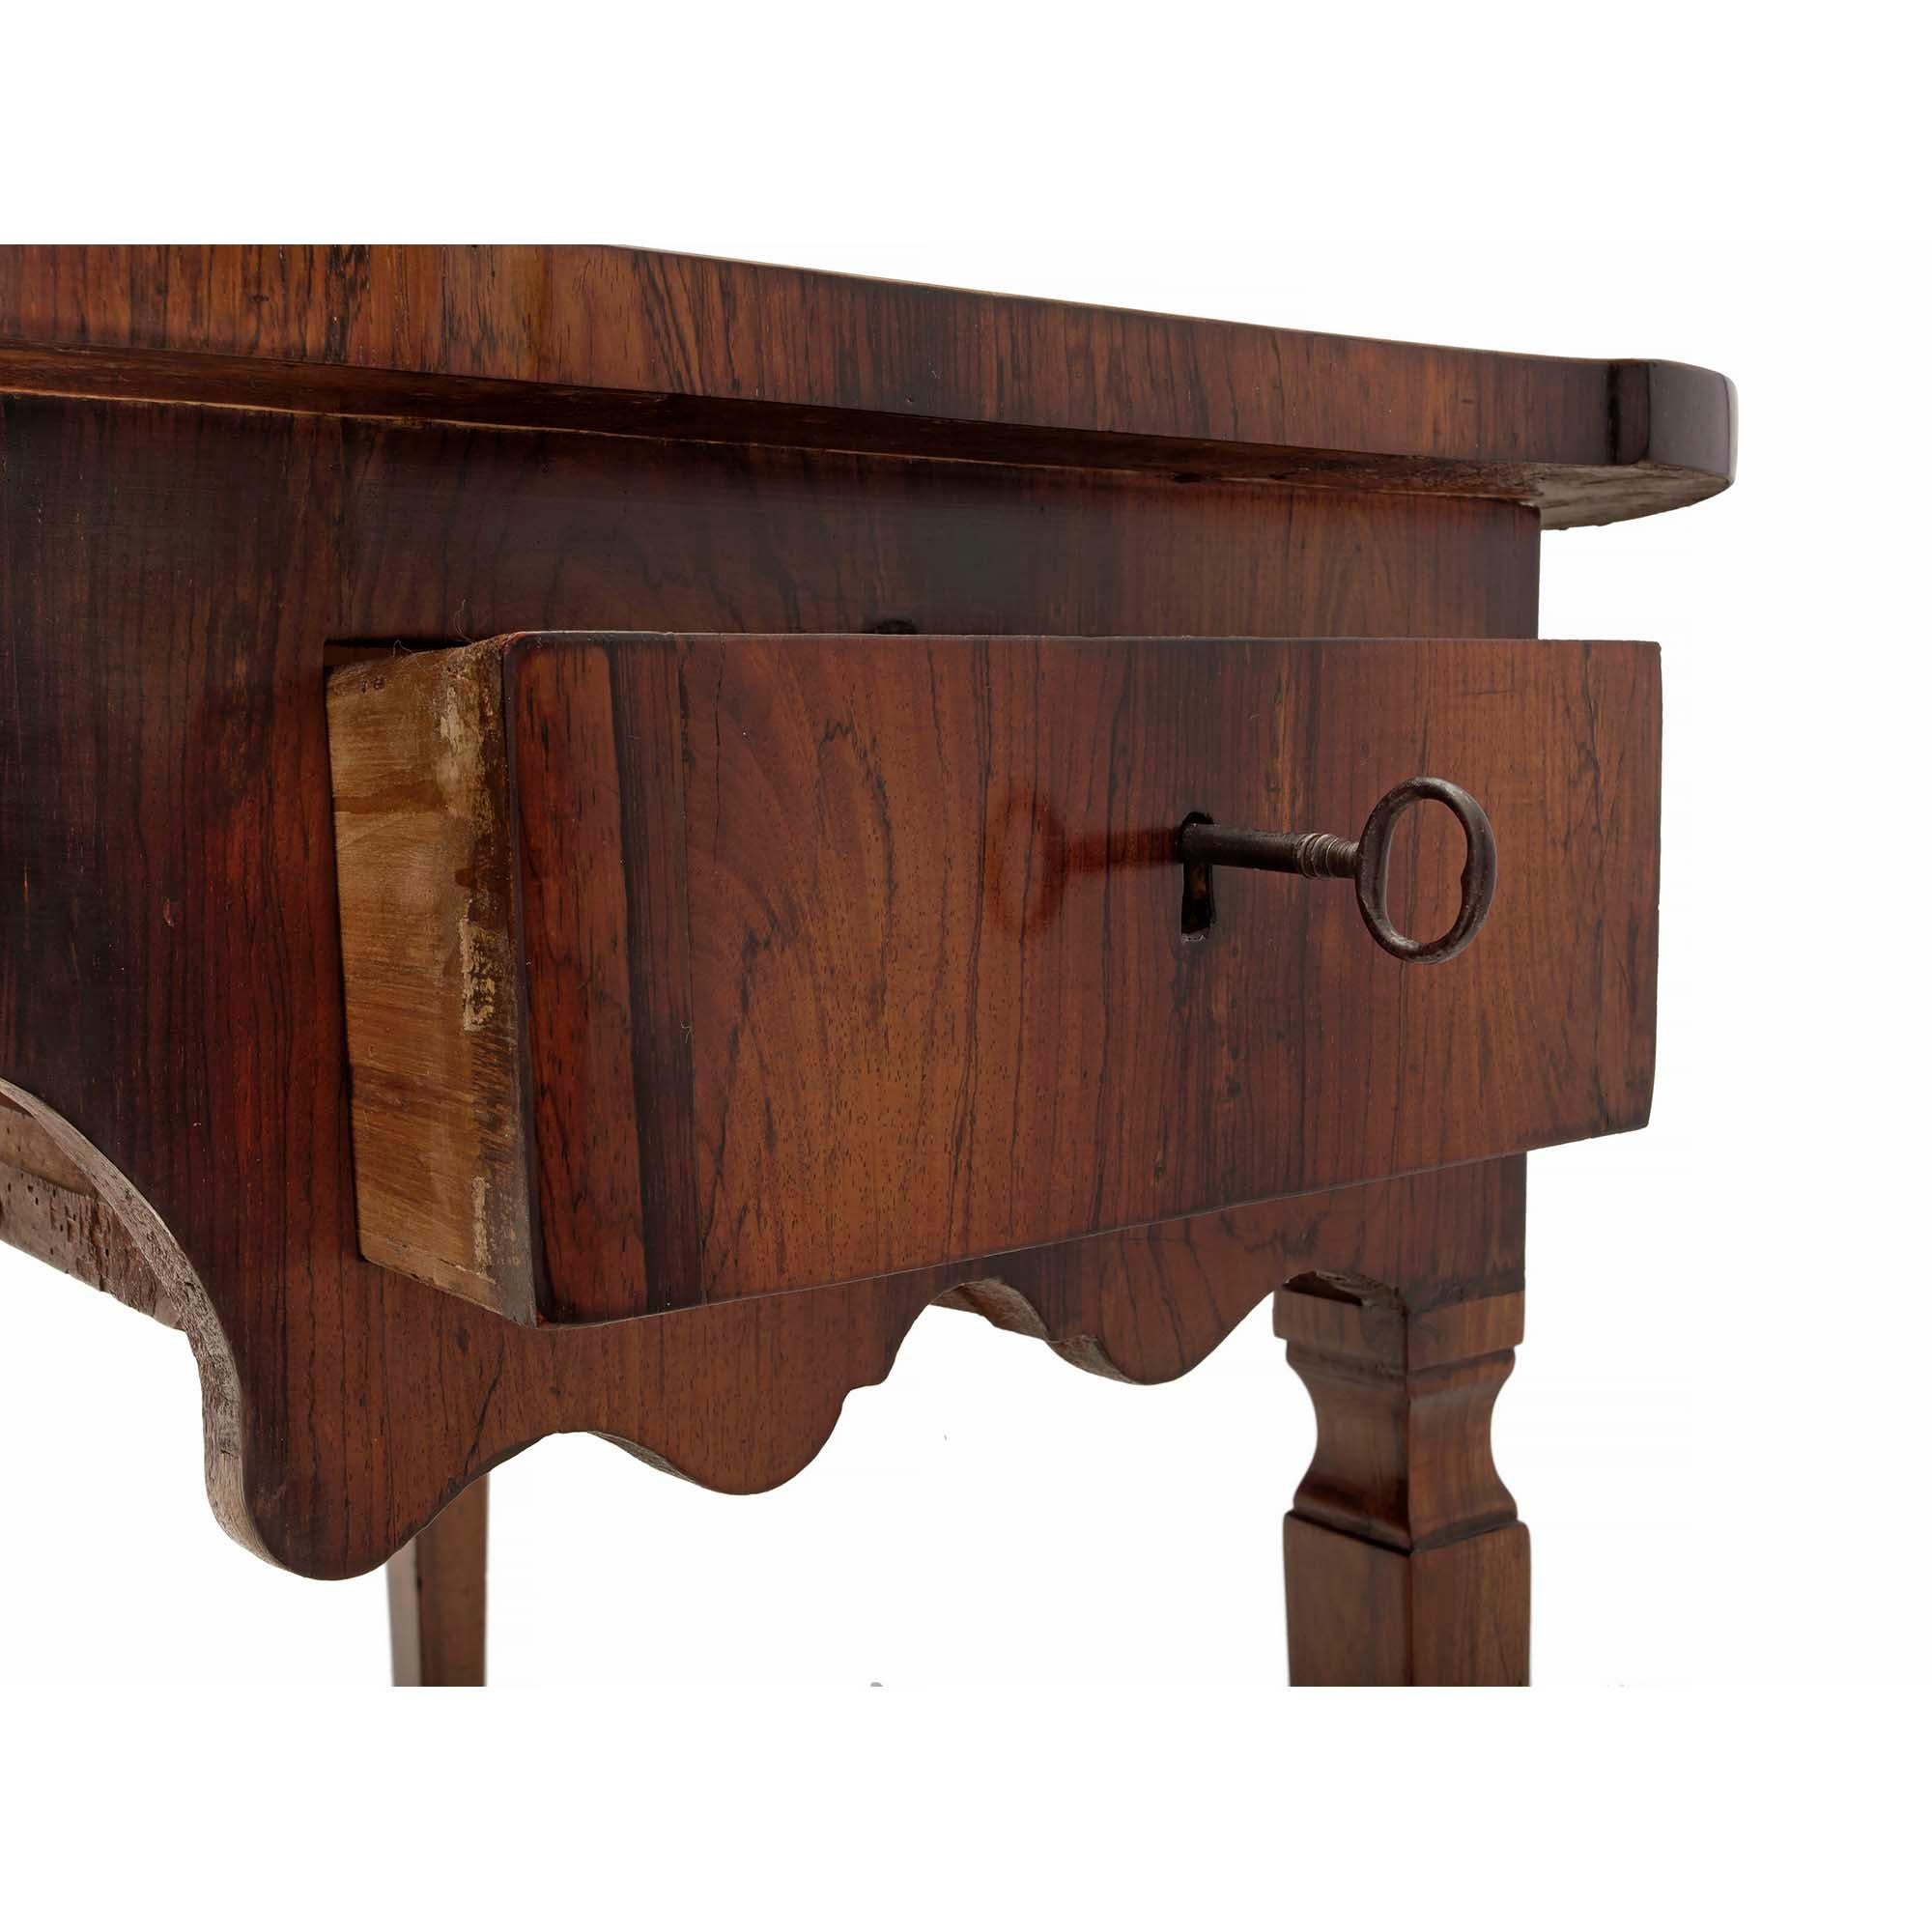 Italian 18th Century Walnut and Rosewood Tuscan Desk For Sale 2